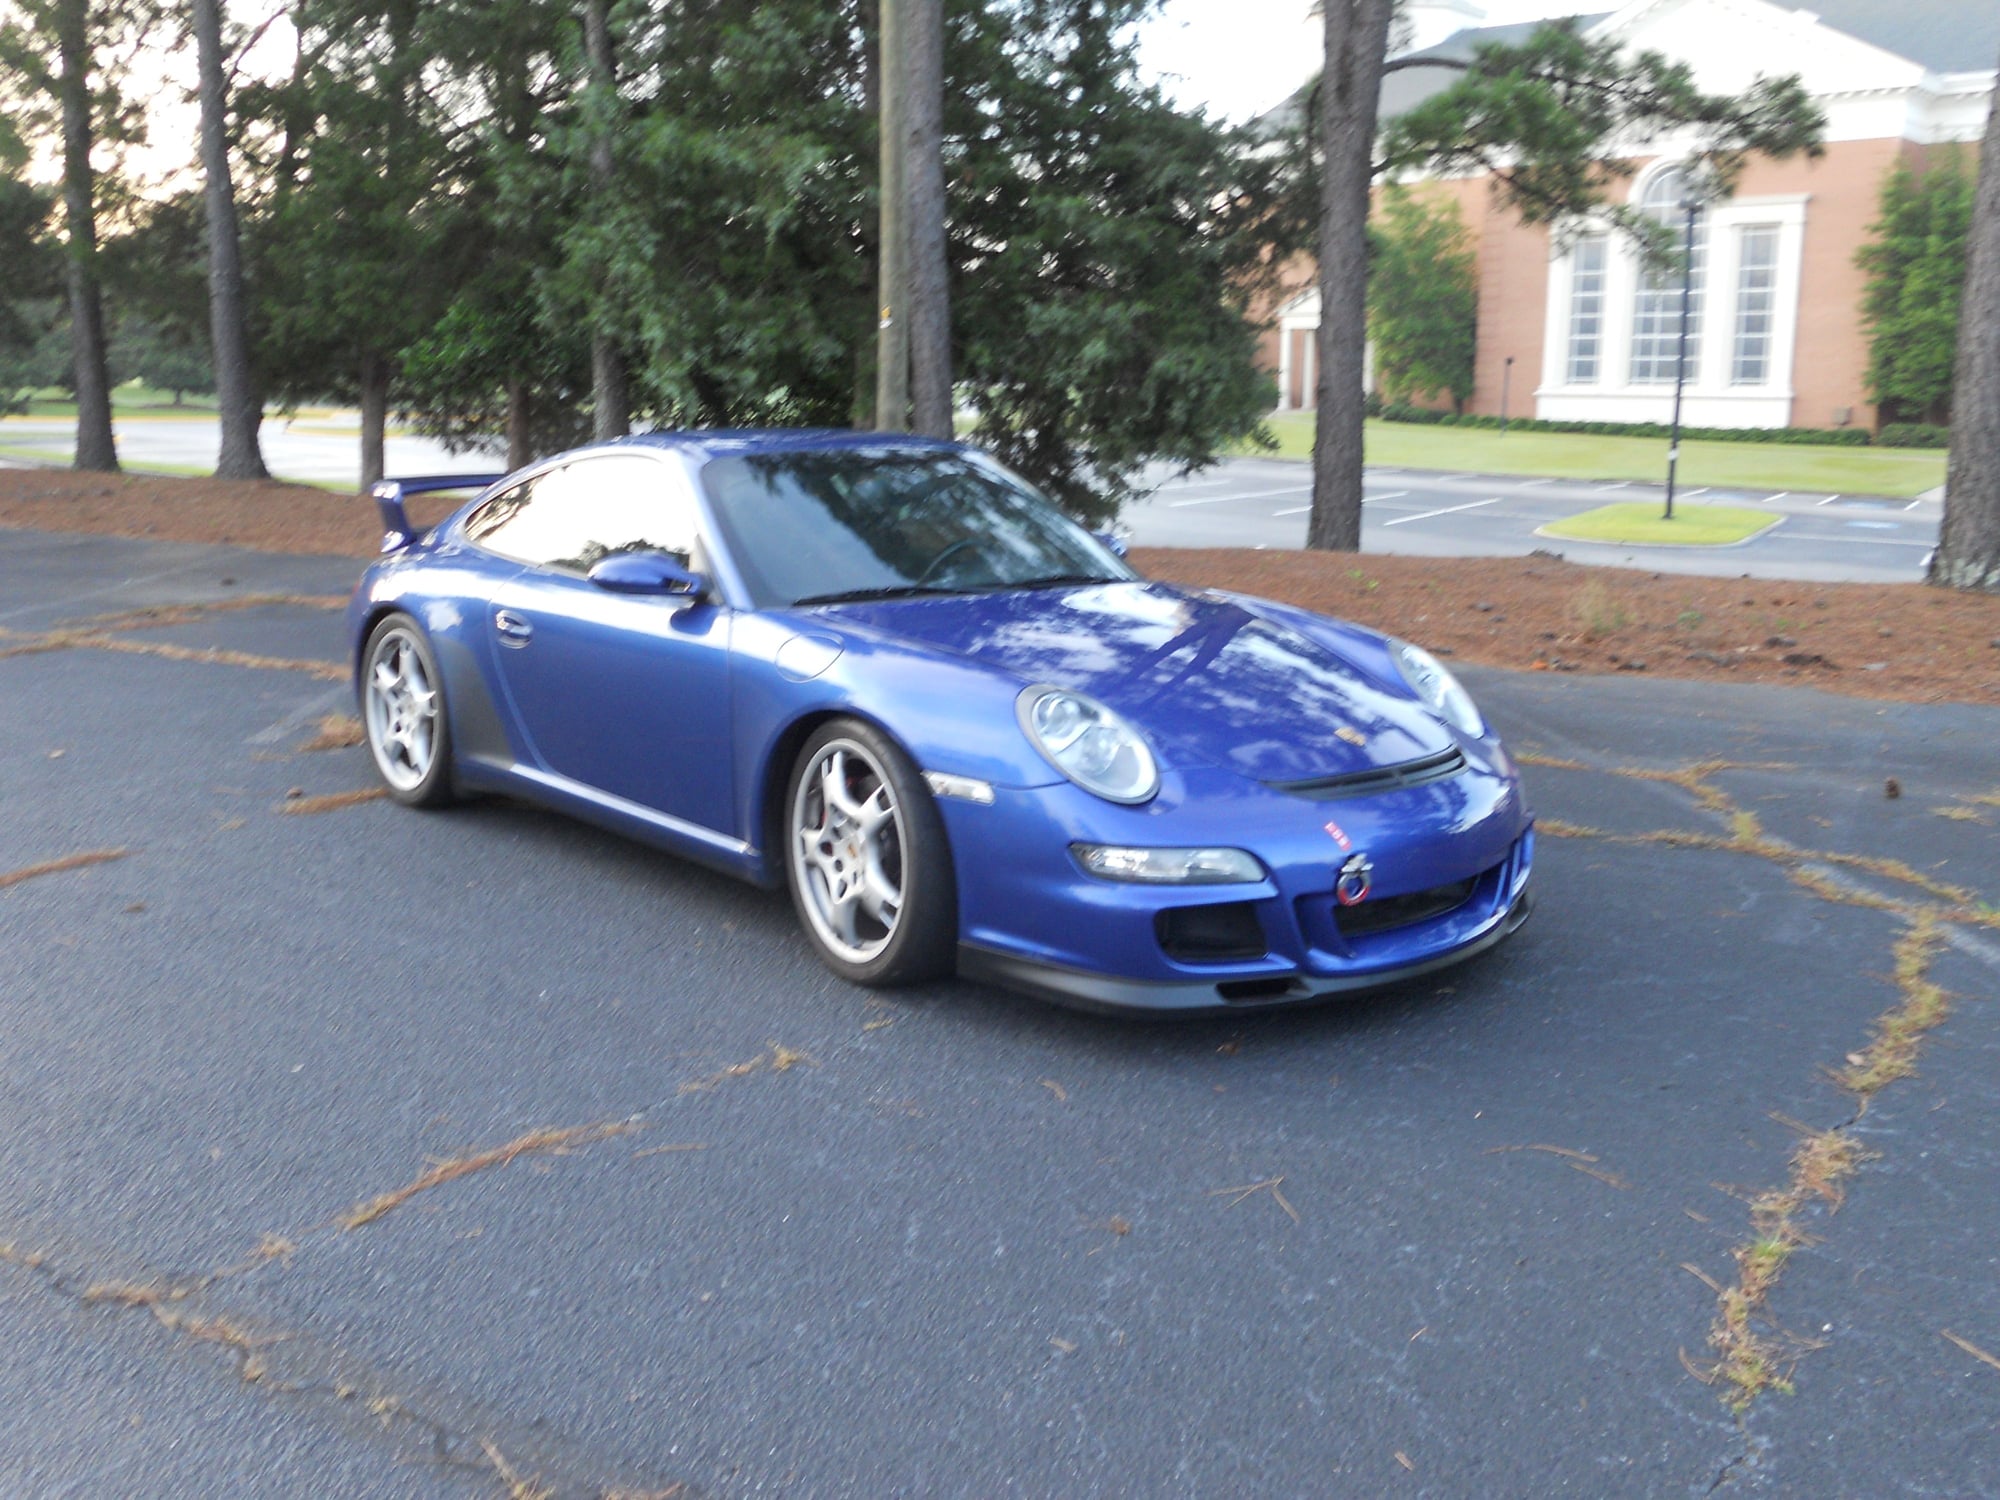 2006 Porsche 911 - Rare cobalt blue 06 C2s w factory X51 kit  price drop 45K - Used - VIN WP0AB29956S741267 - 37,000 Miles - 6 cyl - 2WD - Manual - Coupe - Blue - Augusta, GA 30909, United States